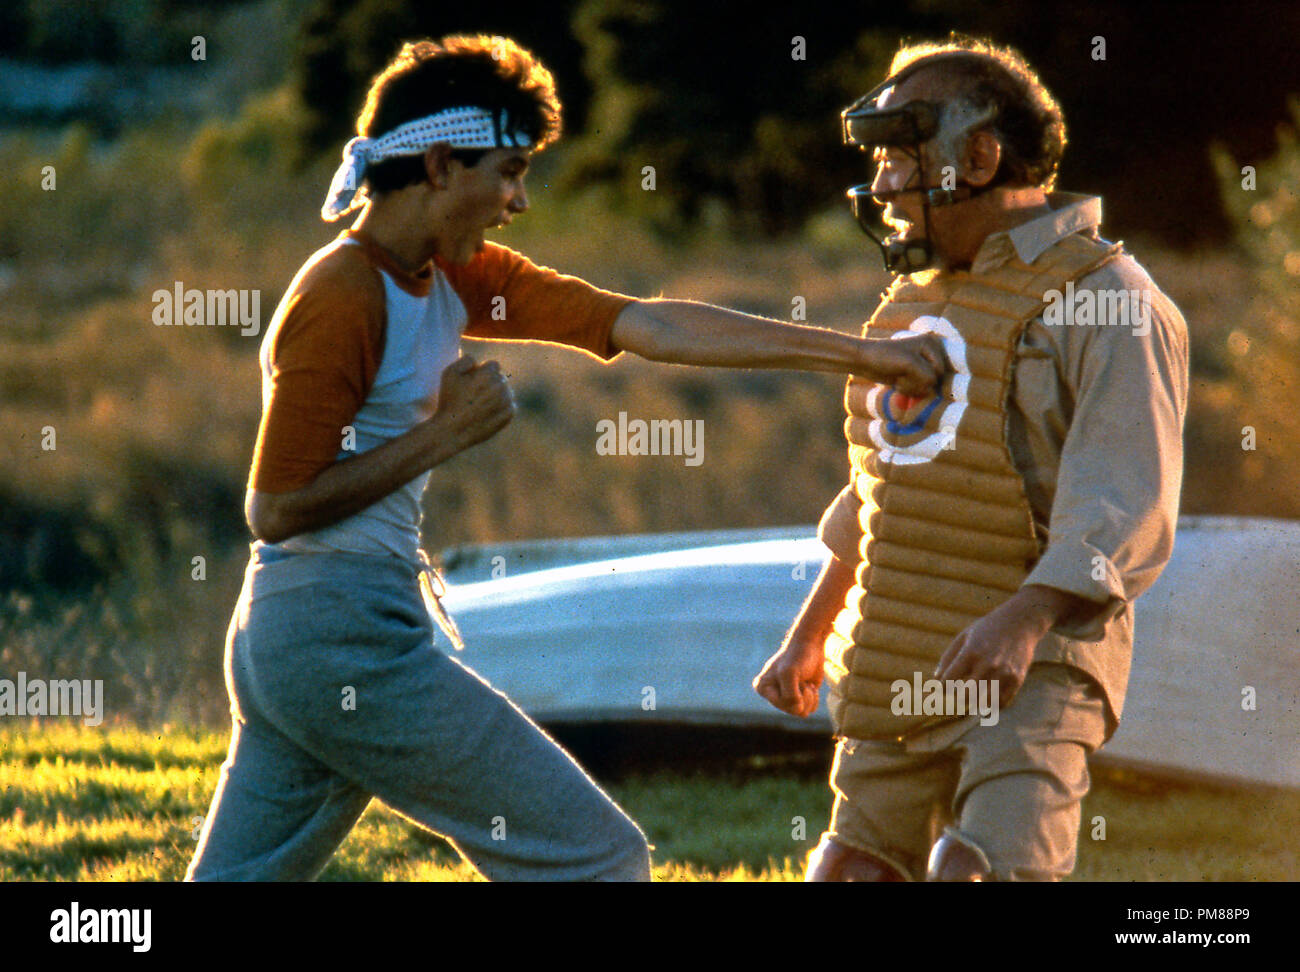 Studio Publicity Still from 'The Karate Kid' Ralph Macchio, Pat Morita  © 1984 Columbia  All Rights Reserved   File Reference # 31706082THA  For Editorial Use Only Stock Photo